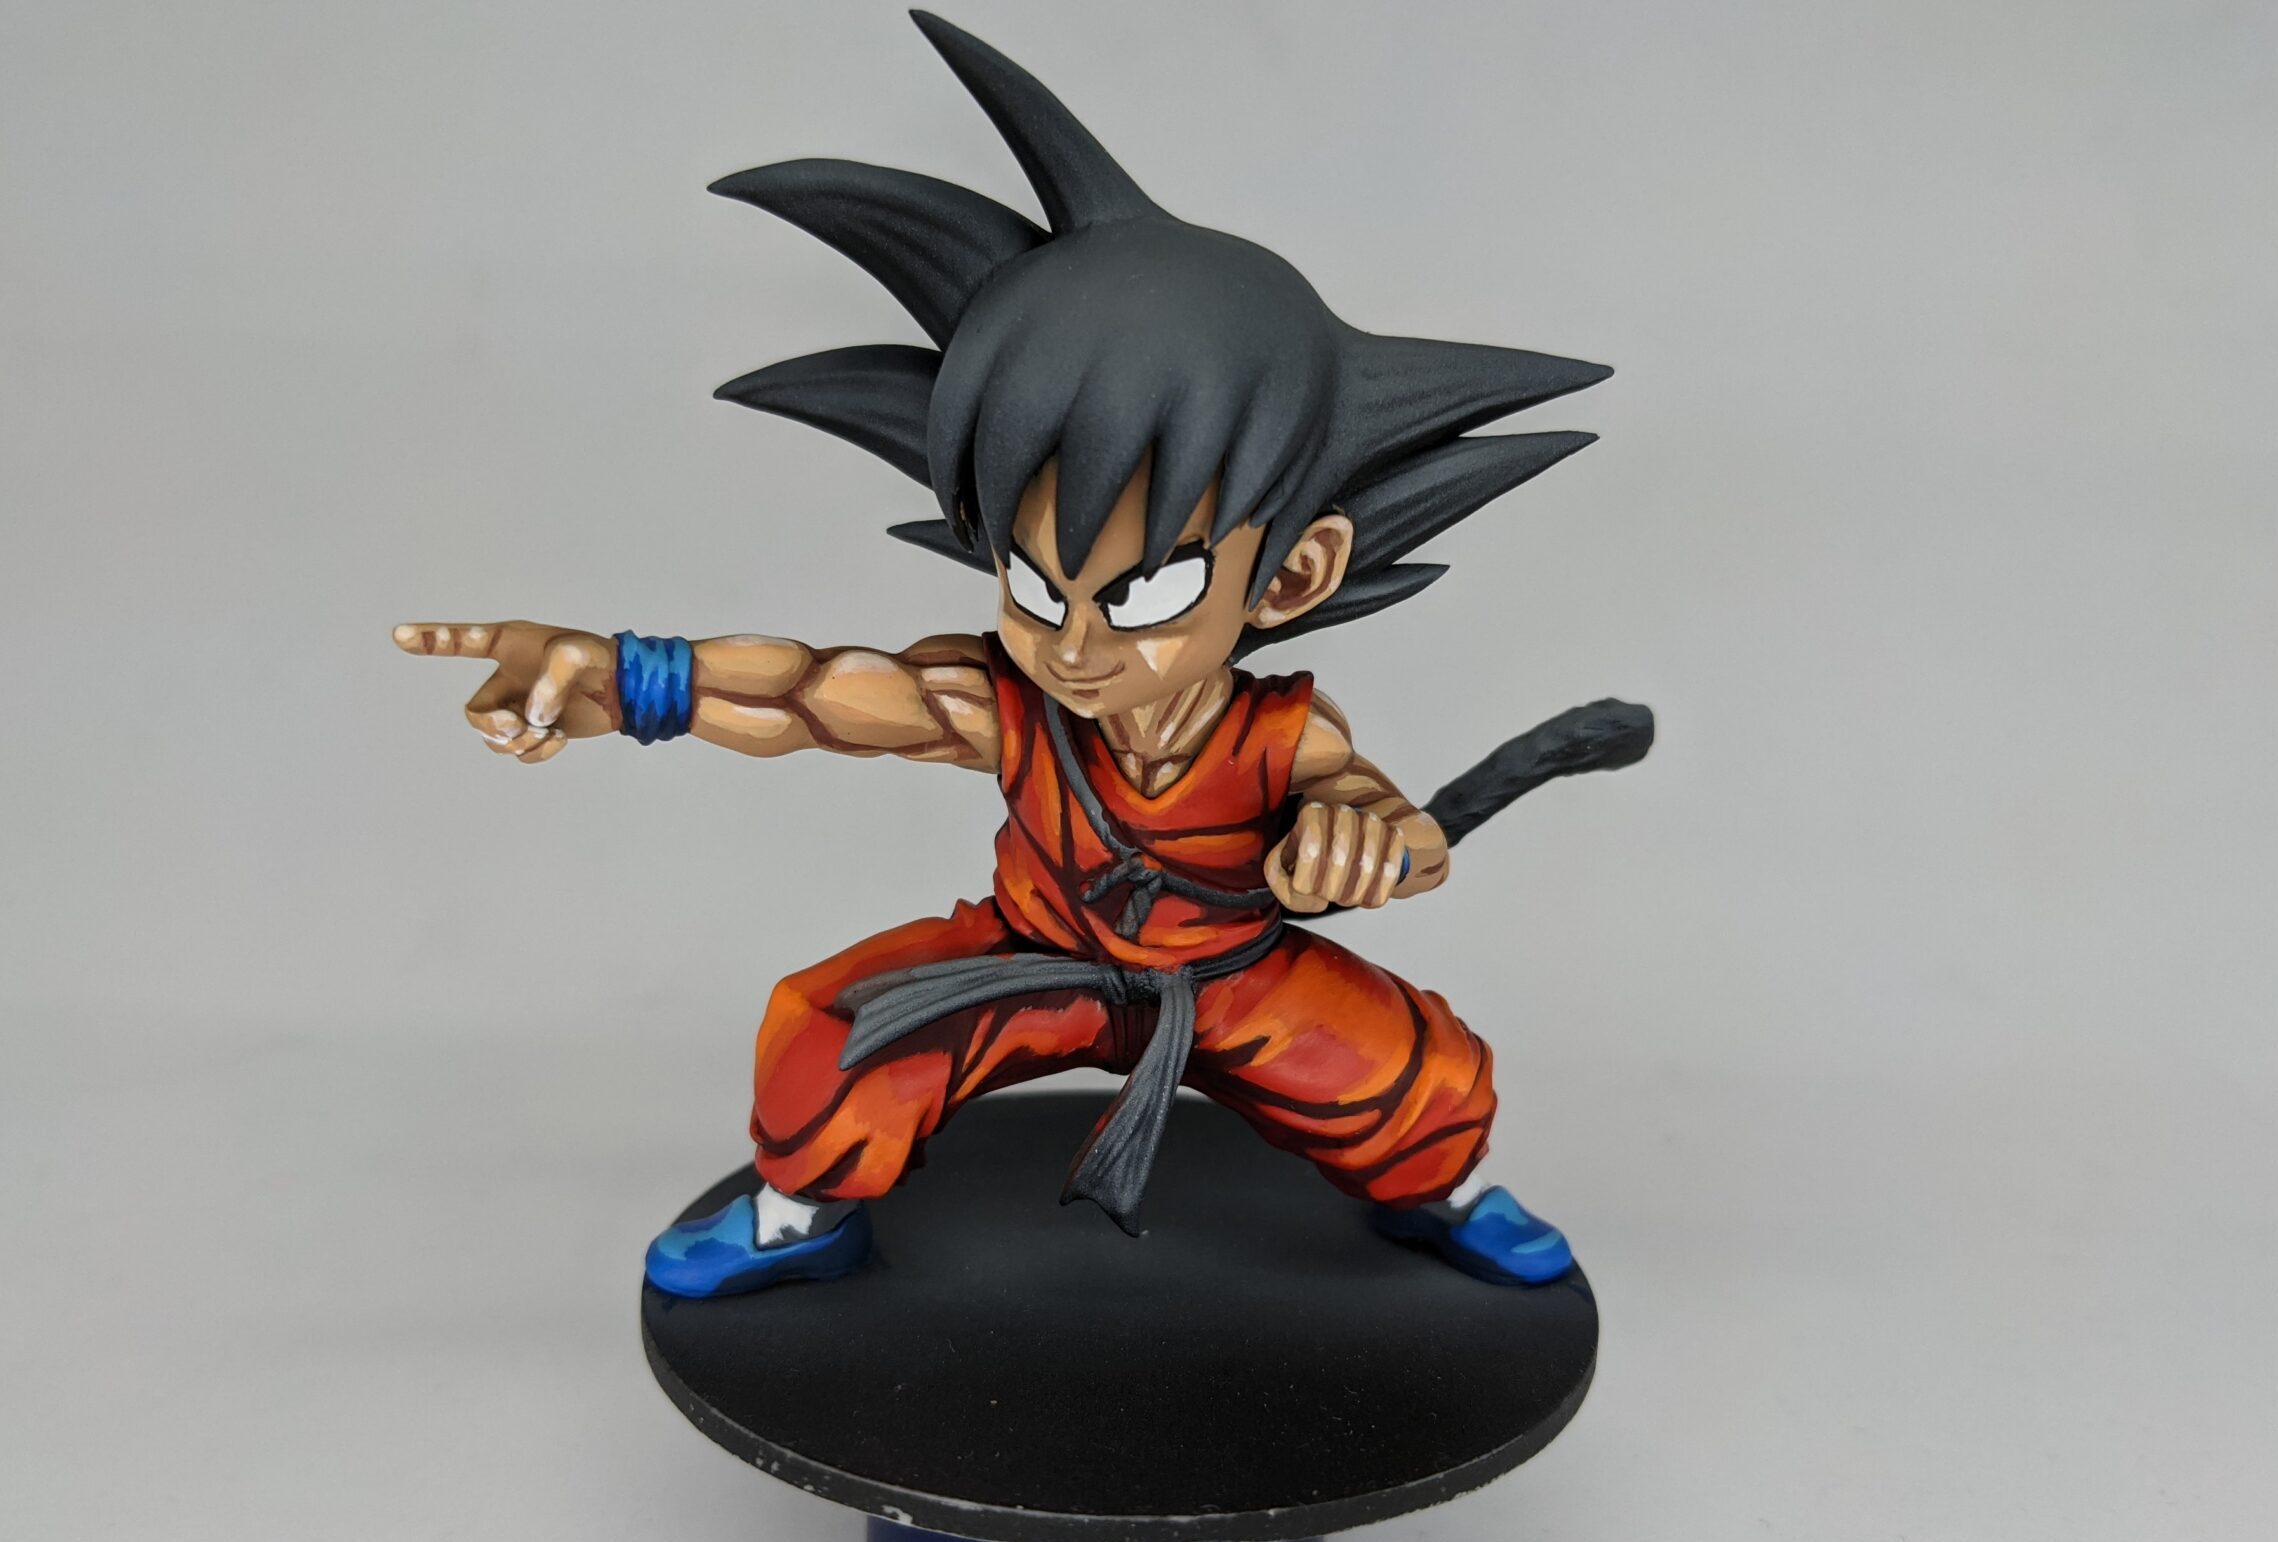 How to paint Goku boy in anime style - Dragon Ball